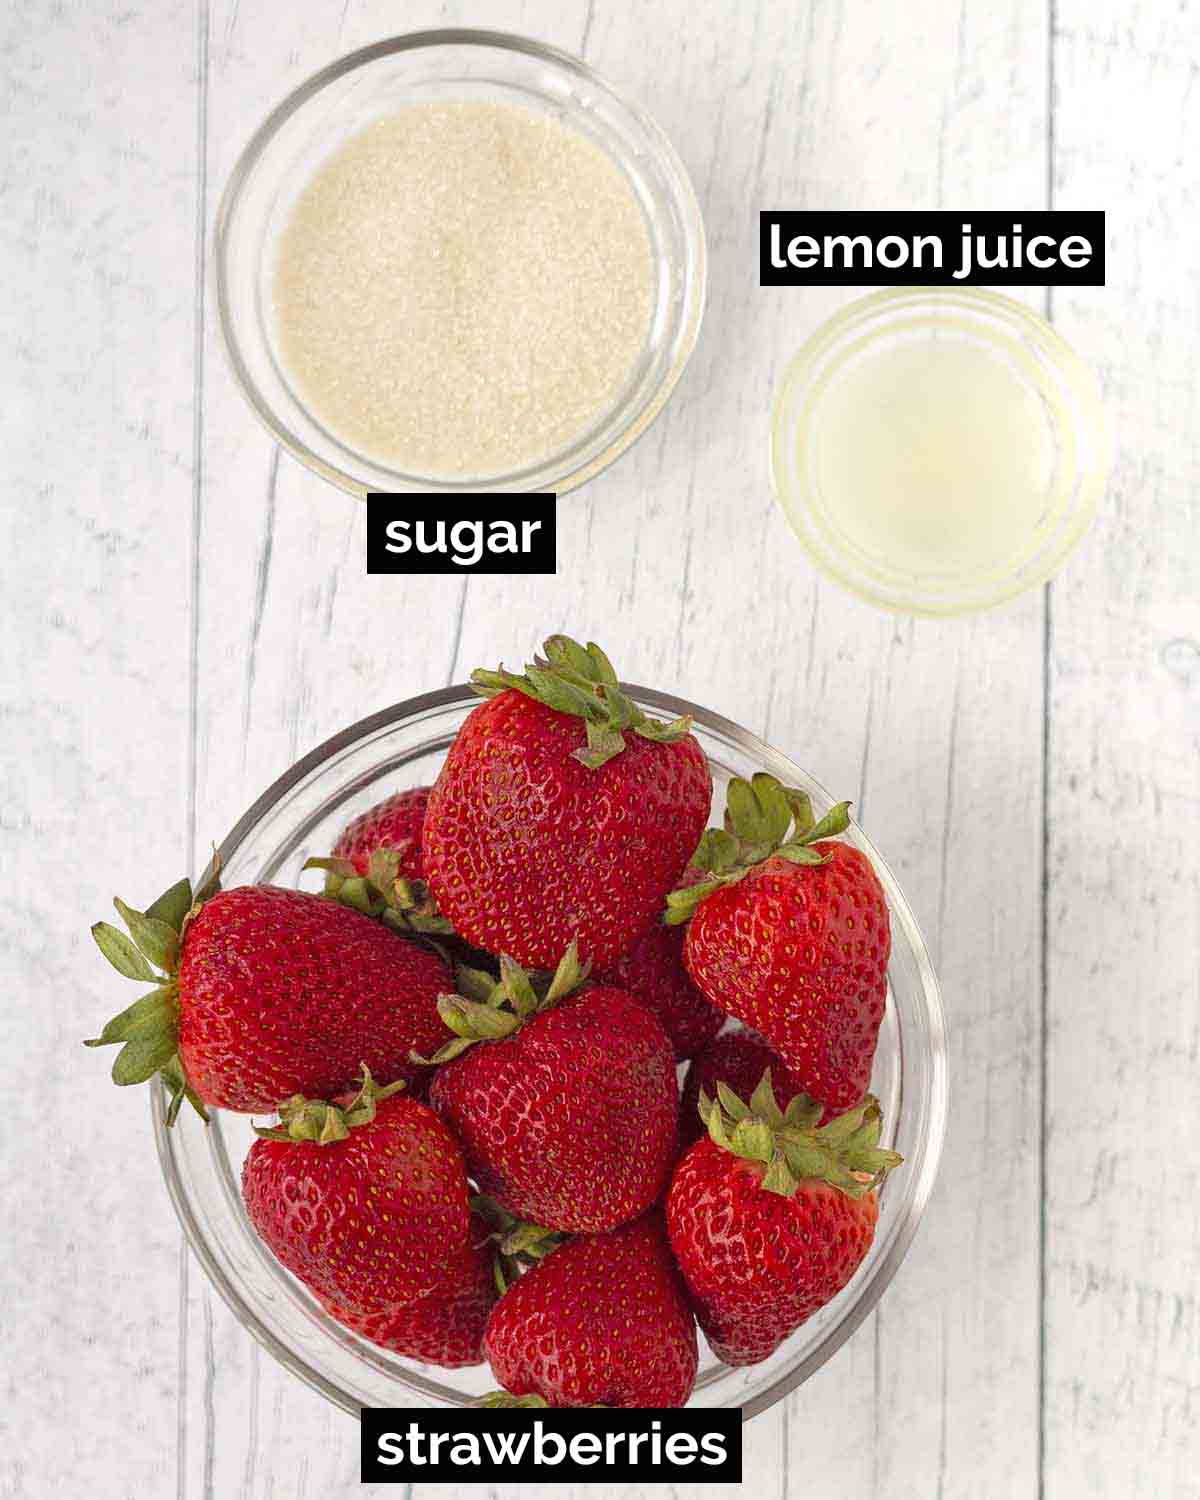 Image shows the three ingredients needed to make strawberry sauce with fresh strawberries (strawberries, sugar, lemon juice).